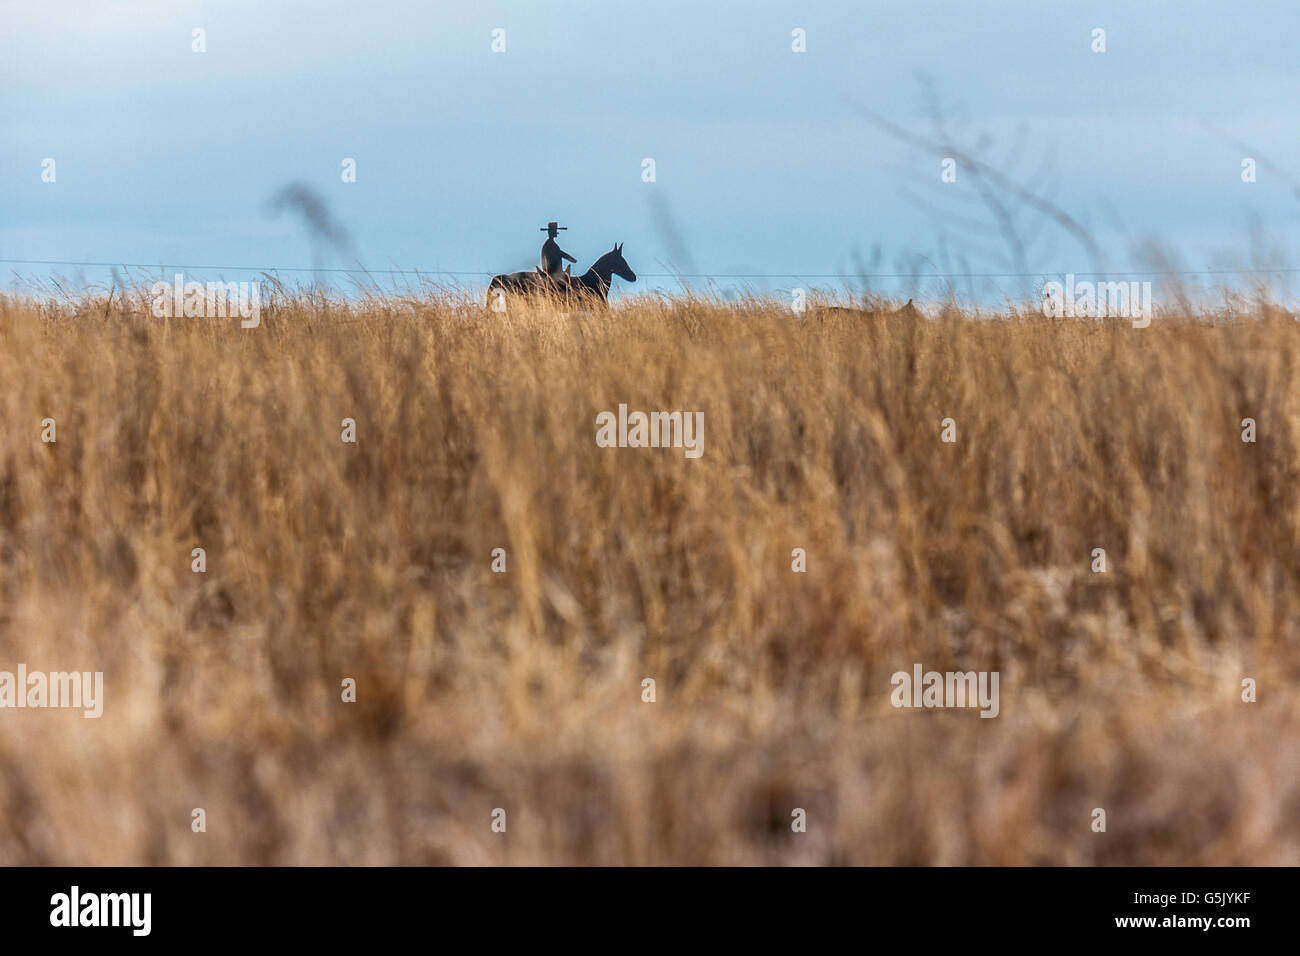 Wooden cut-out of cowboy riding a horse on the horizon of a grain field in north east Nebraska Stock Photo